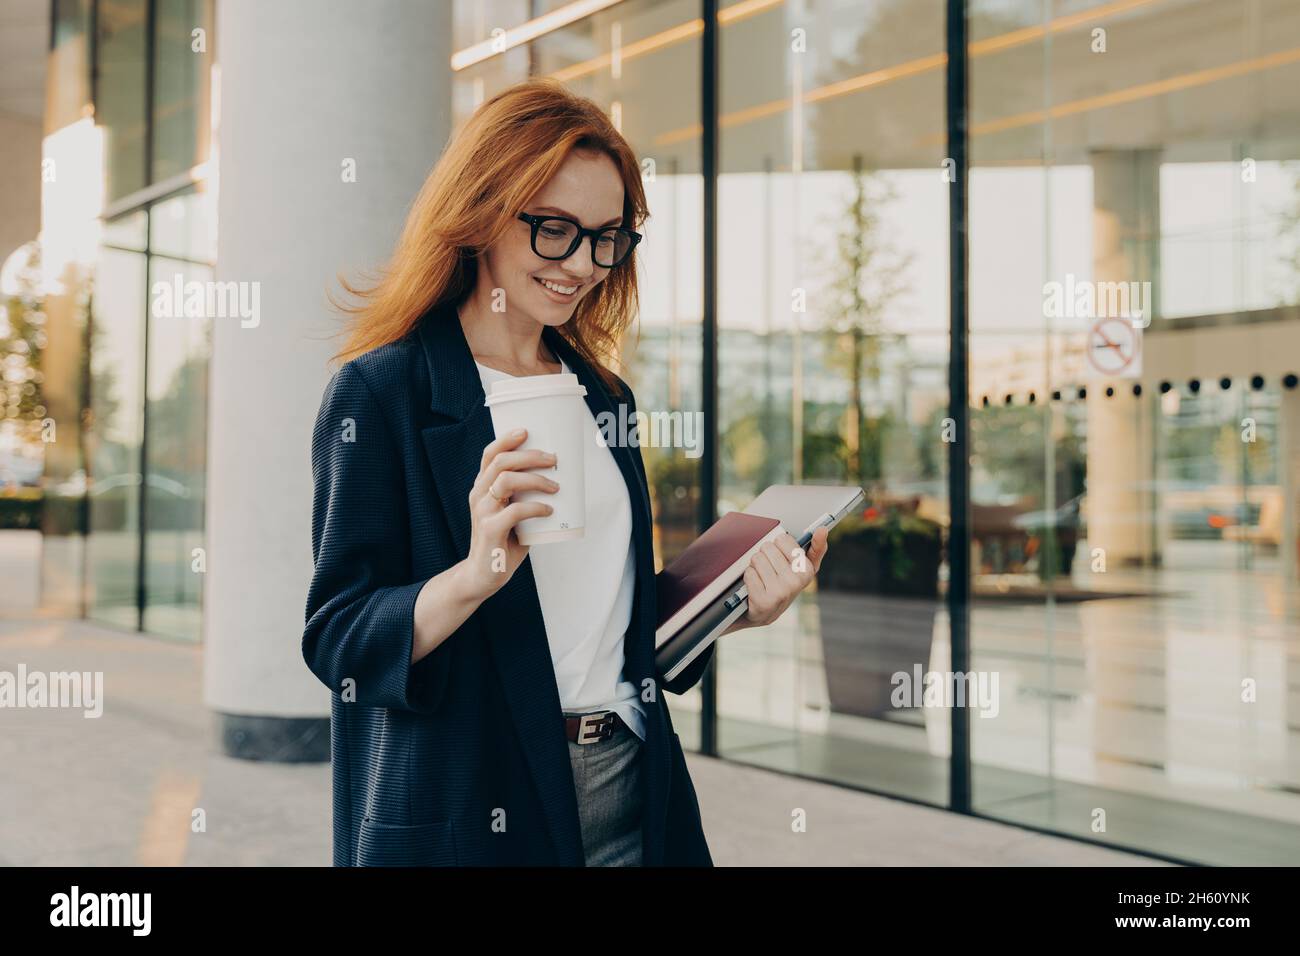 Smiling redhead woman corporate worker dressed in formal clothes drinks coffee Stock Photo